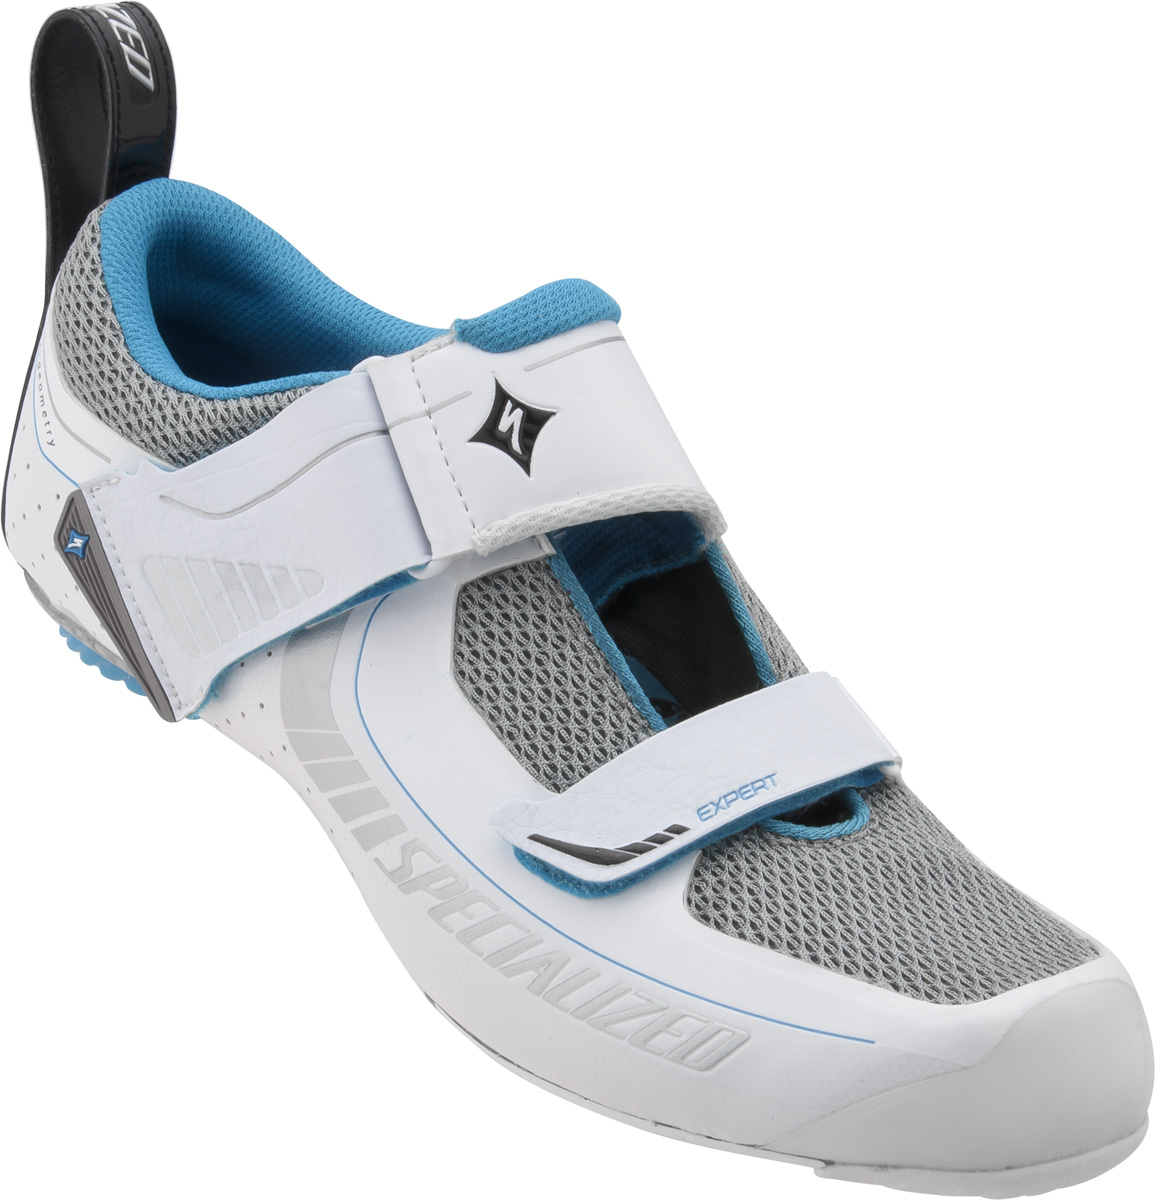 Specialized Trivent Expert Shoes 